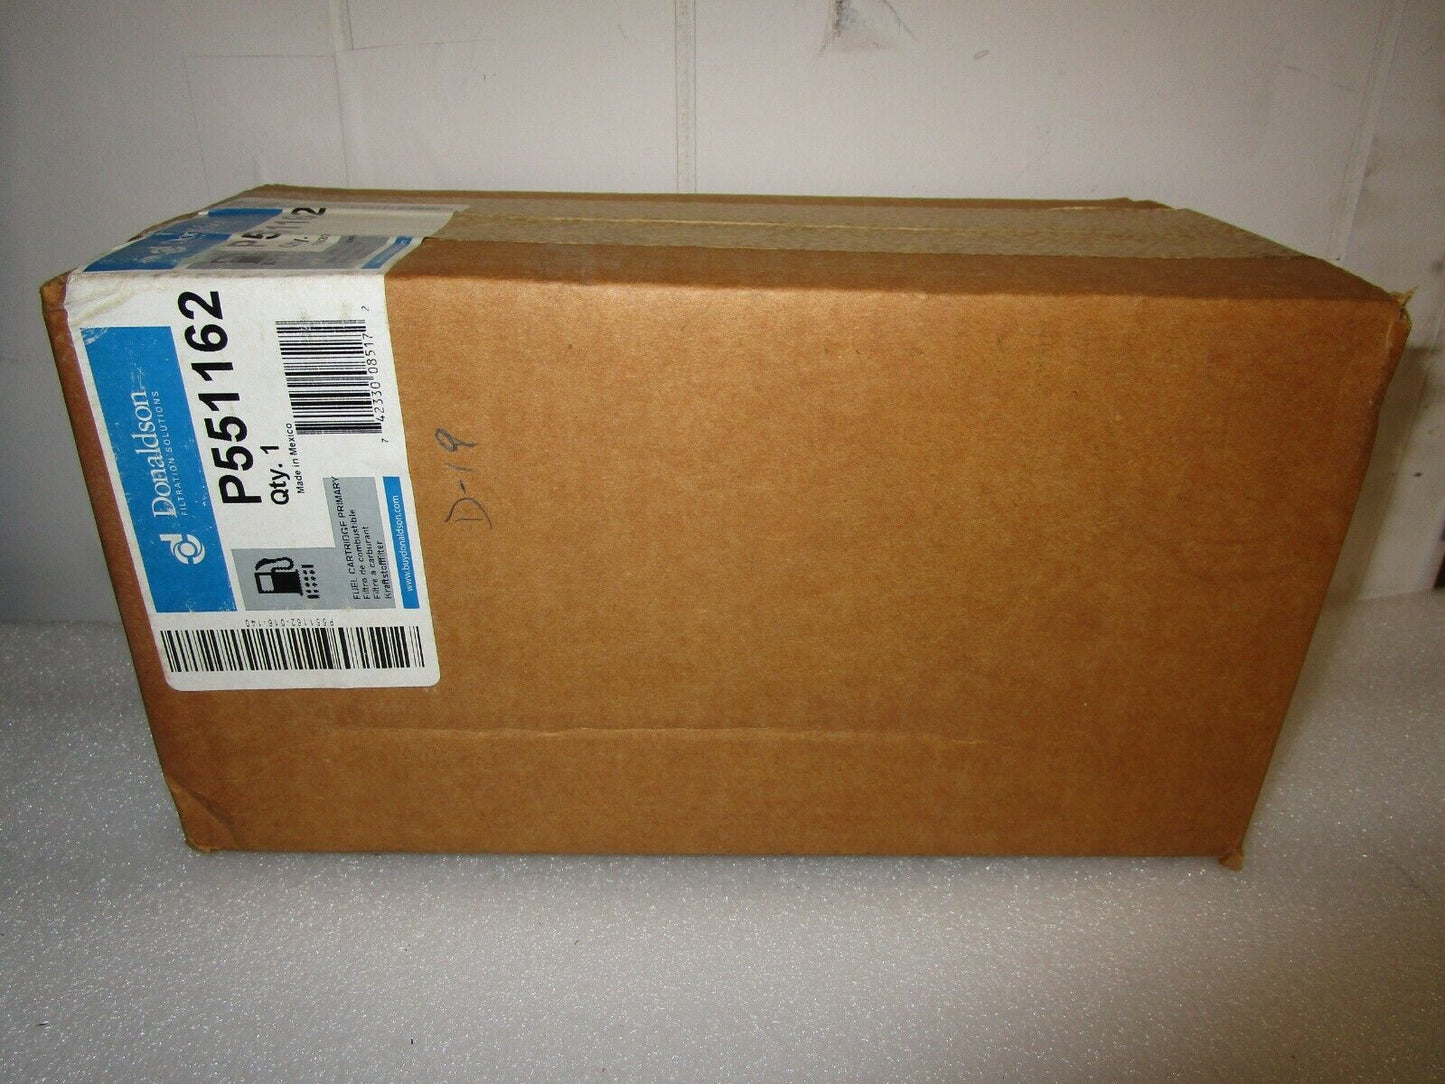 DONALDSON CART FUEL FILTER # P551162 *New in Box*